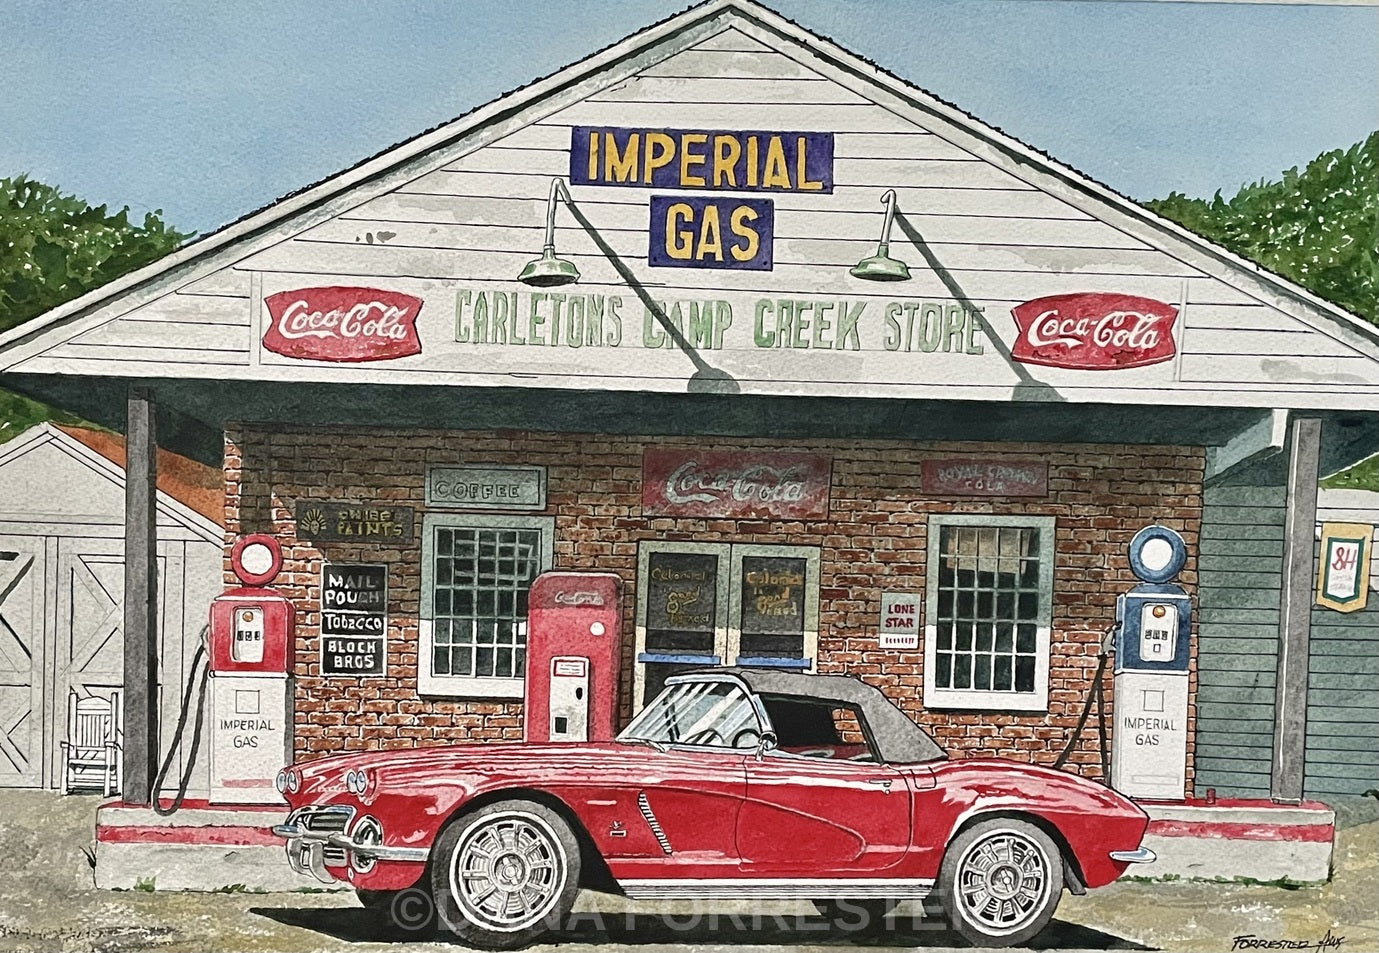 "Imperial Gas"